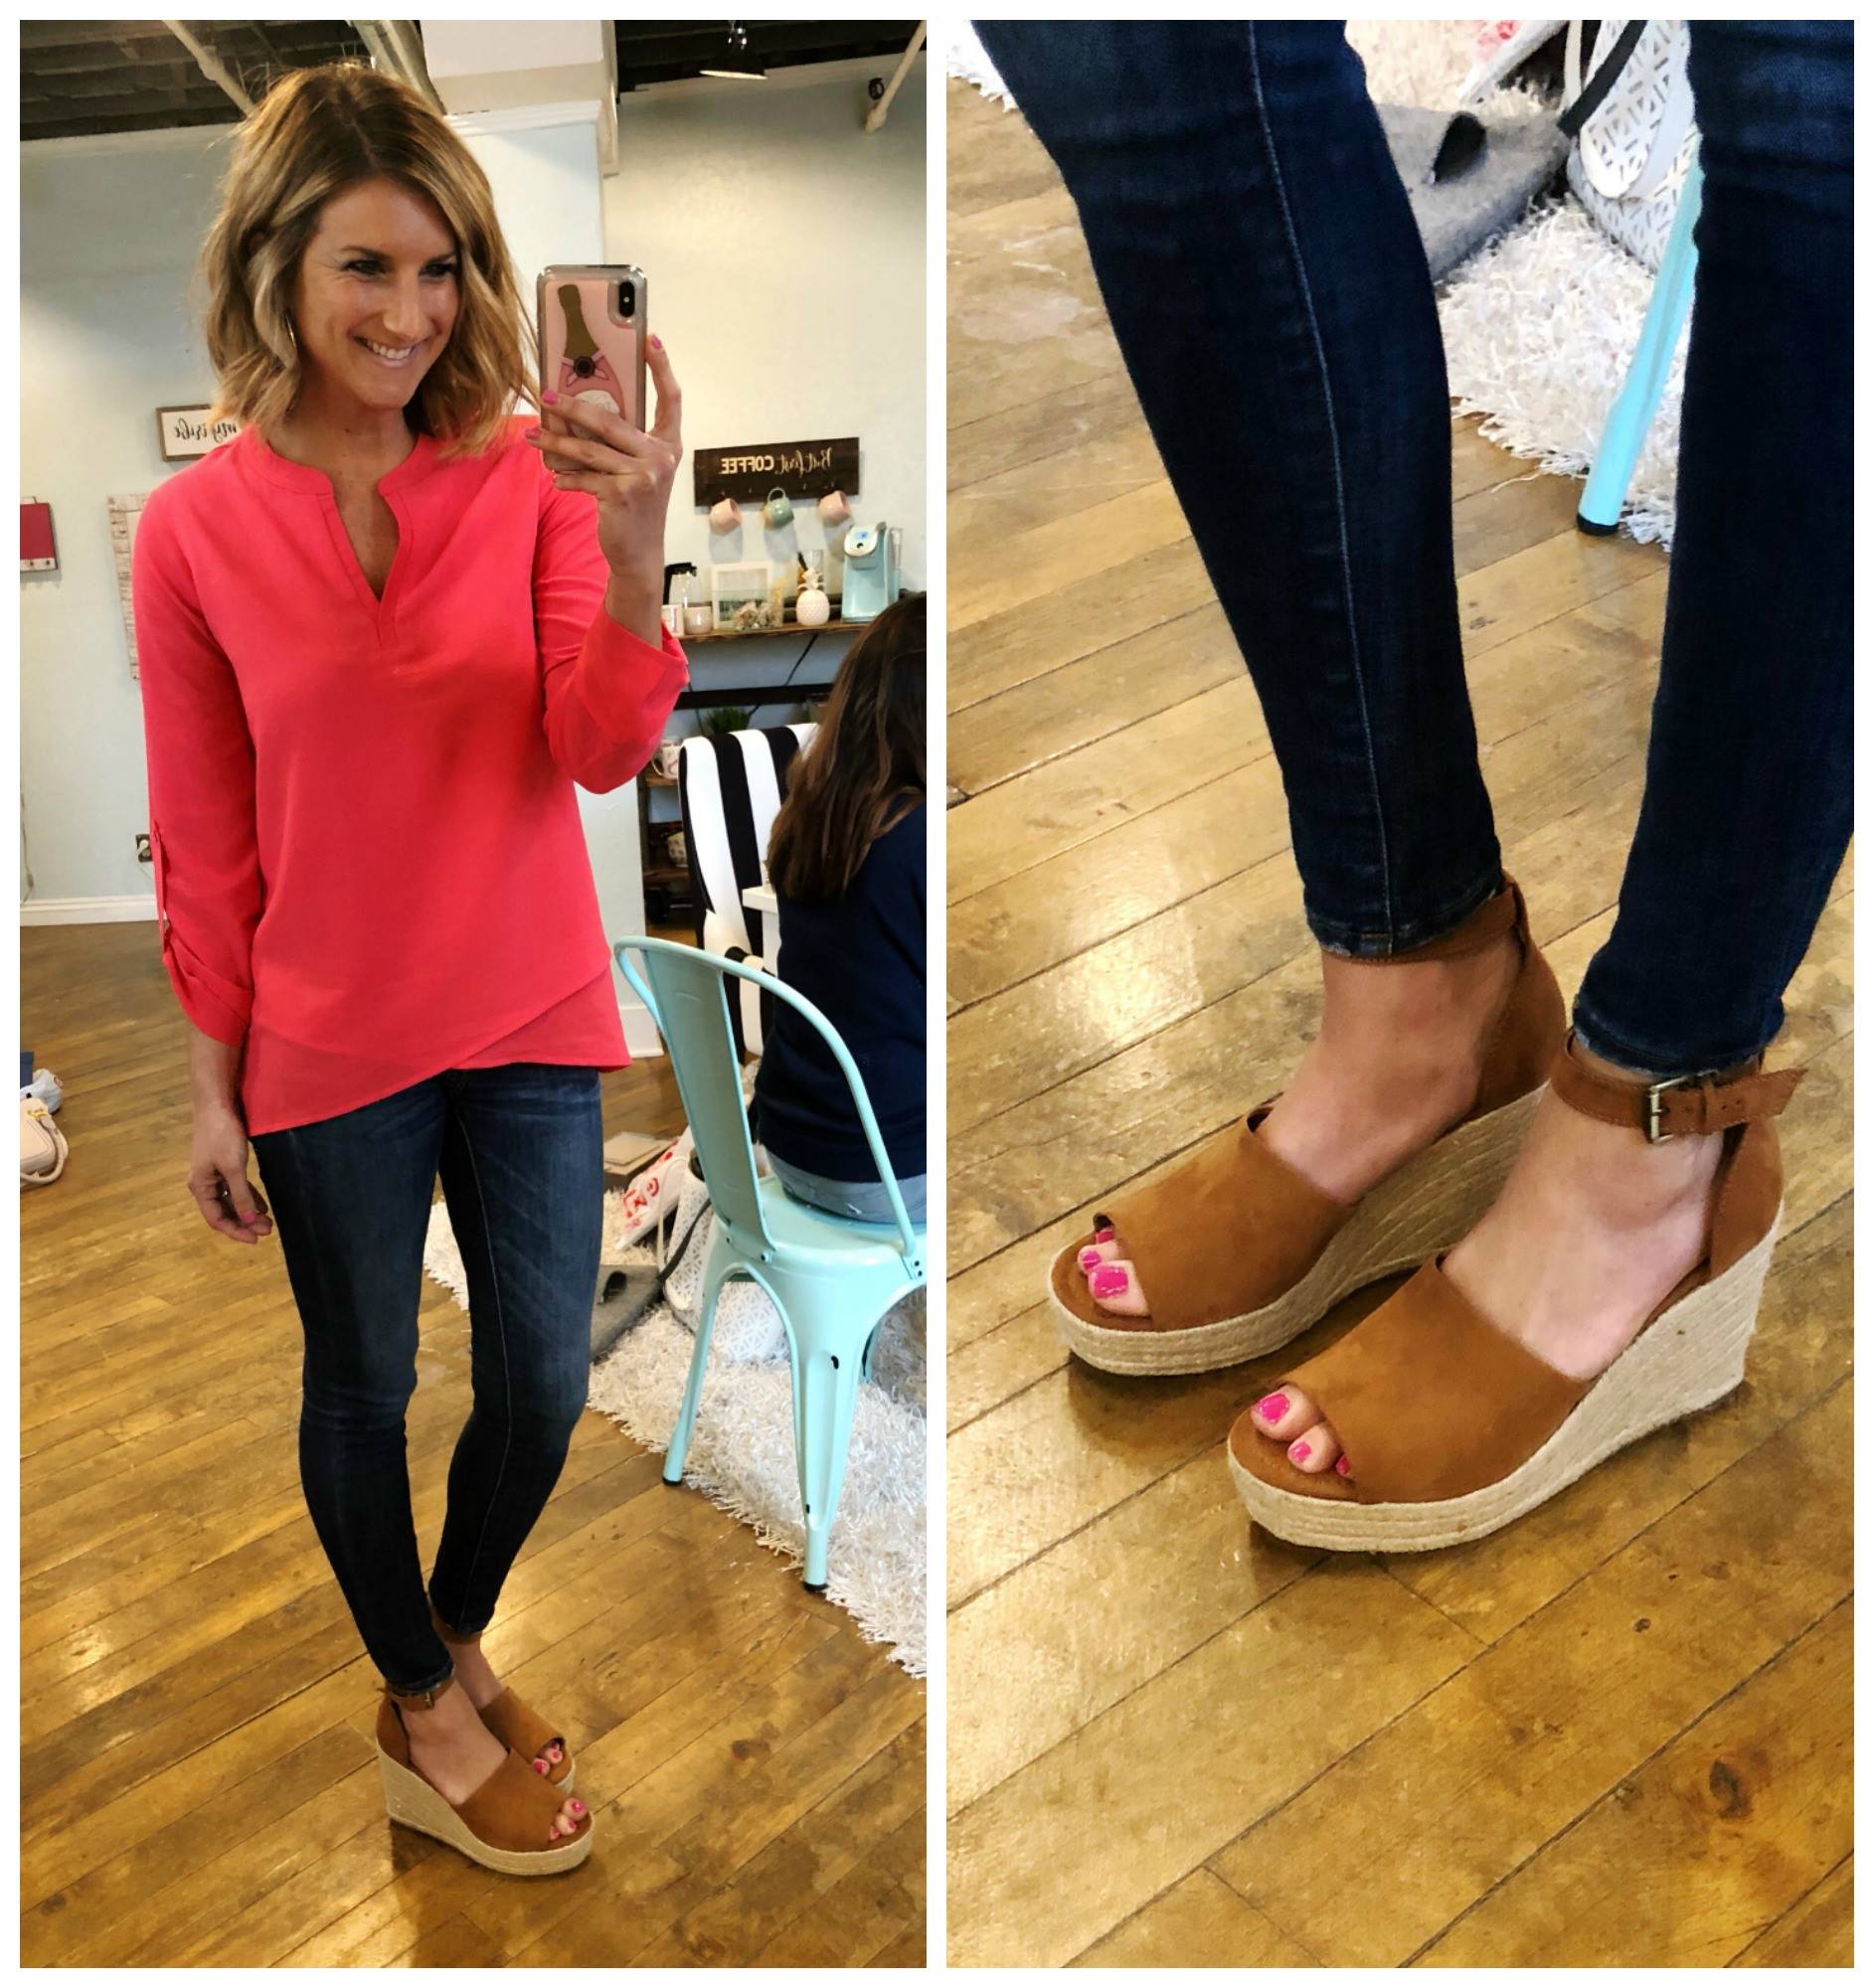 How to Add a Pop of Color to Spring Outfit // Crossover Tunic + Jeggings + Open Toe Wedge Sandals // Target Wedge Sandals